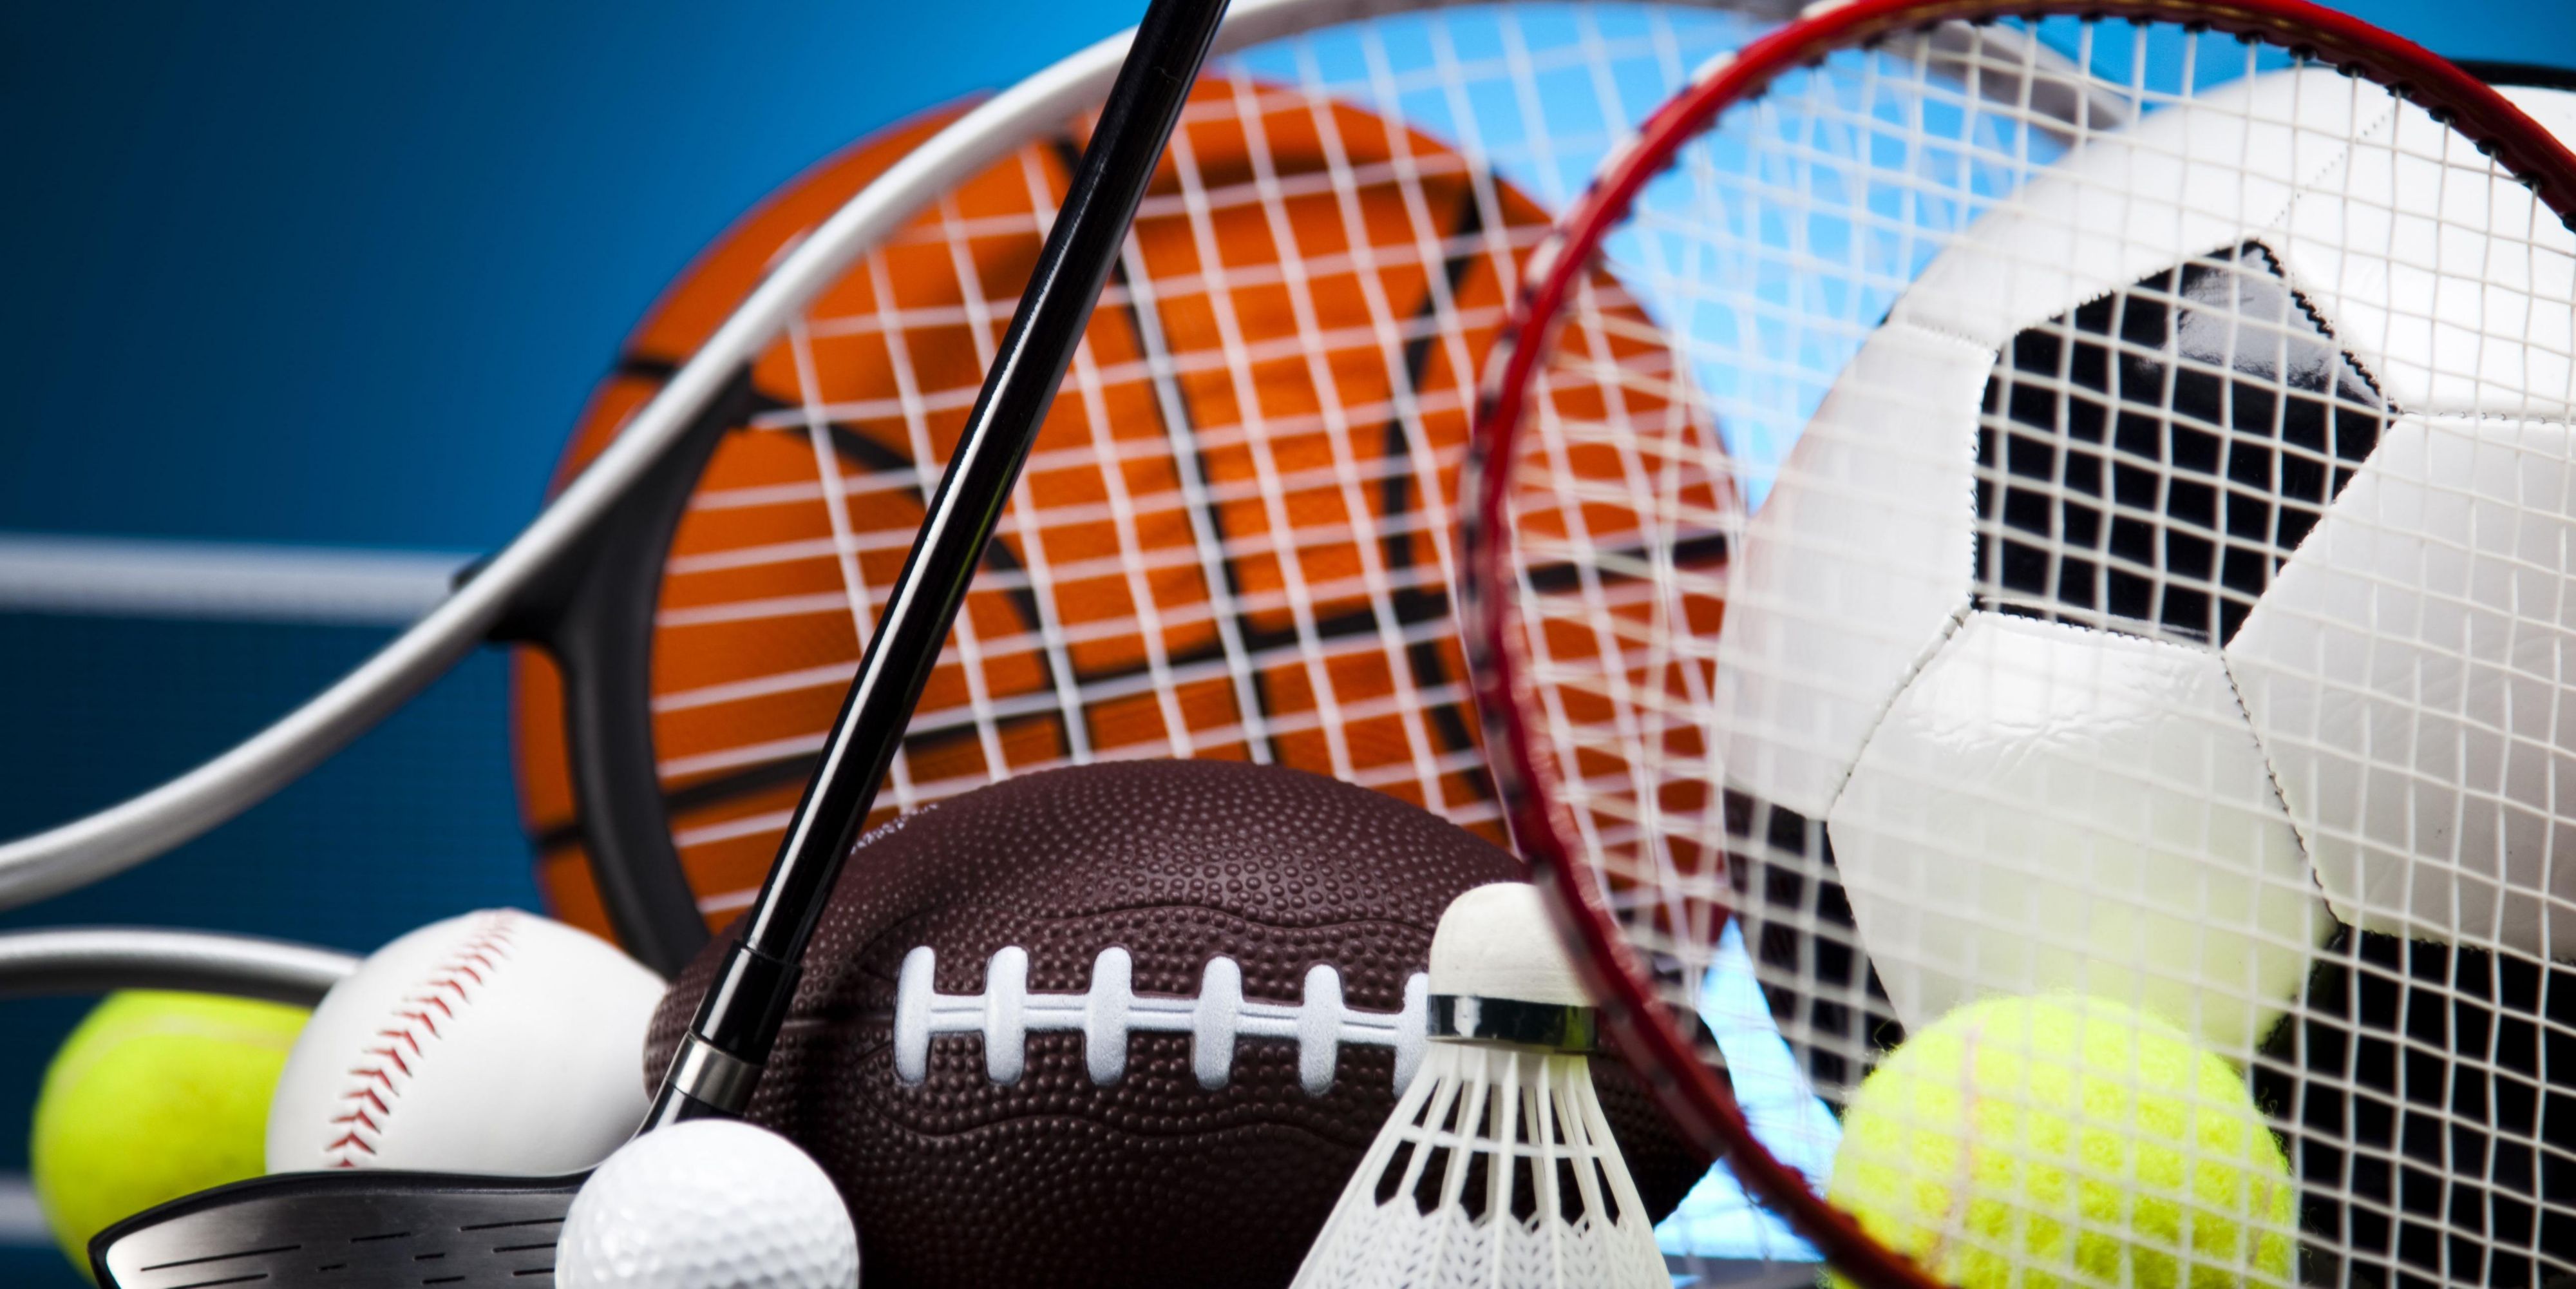 Whatever sport you are traveling for, be it water sports, basketball, hockey, baseball, swimming, fencing, or others, we have you covered. Our quiet and clean rooms will ensure you are well rested and ready for game day. Ask us about our group rates.